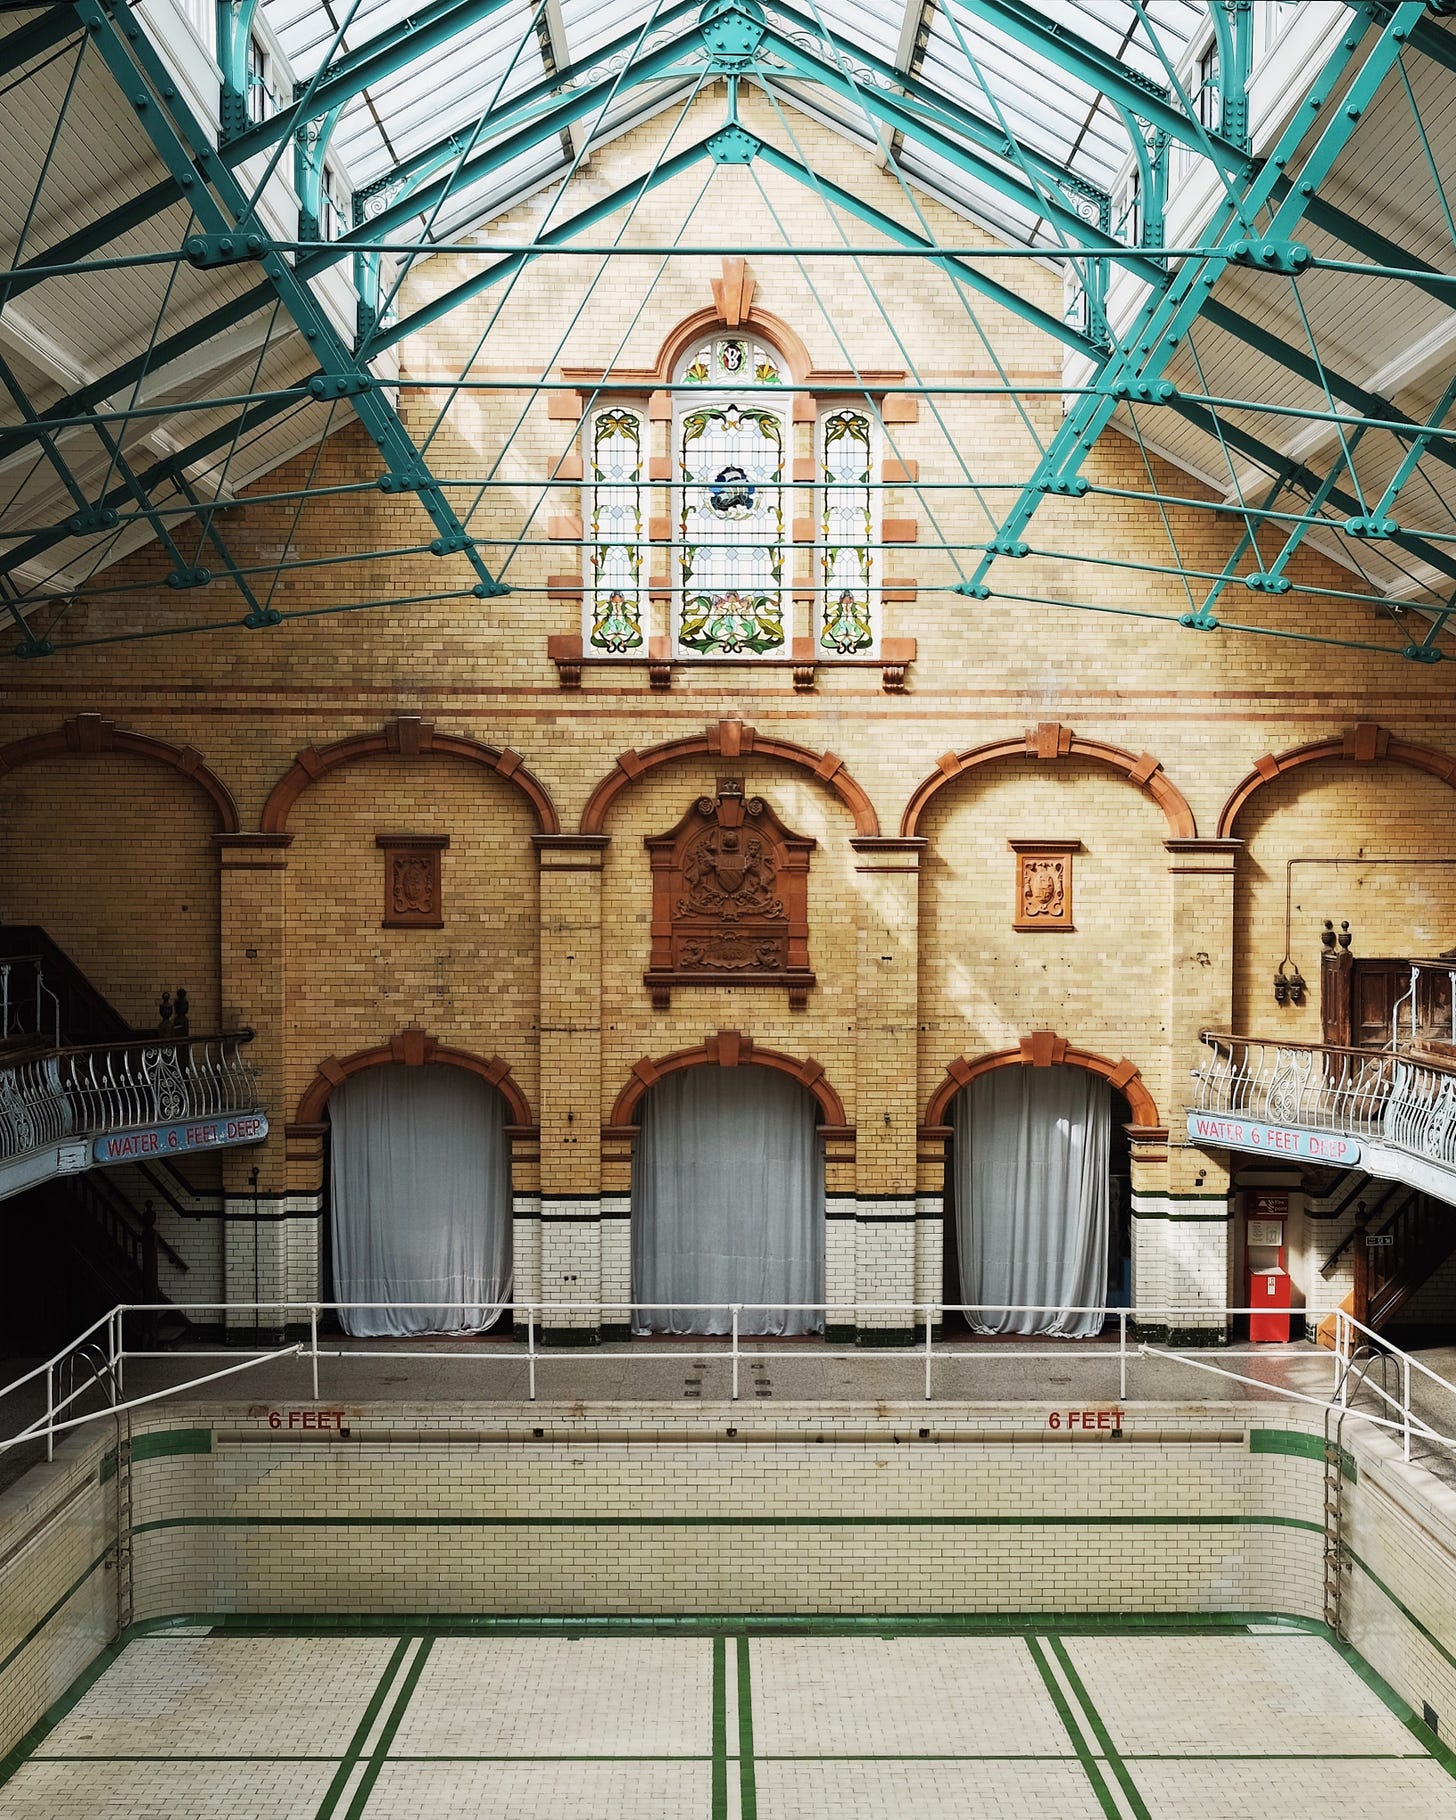 A photo of an empty pool at the Victoria Baths in Manchester, UK